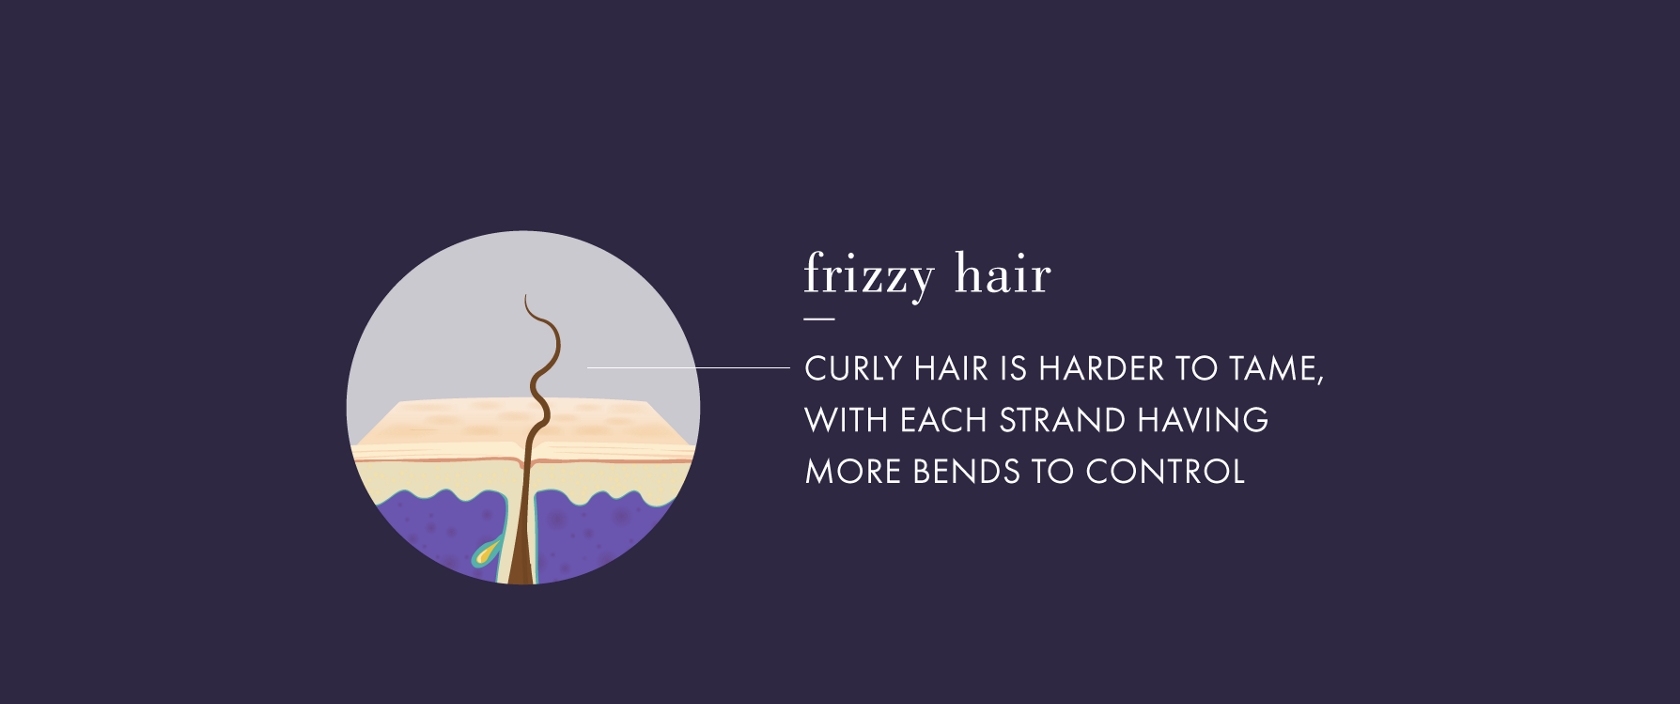 What Causes Frizzy Hair? | Hair Care by John Frieda